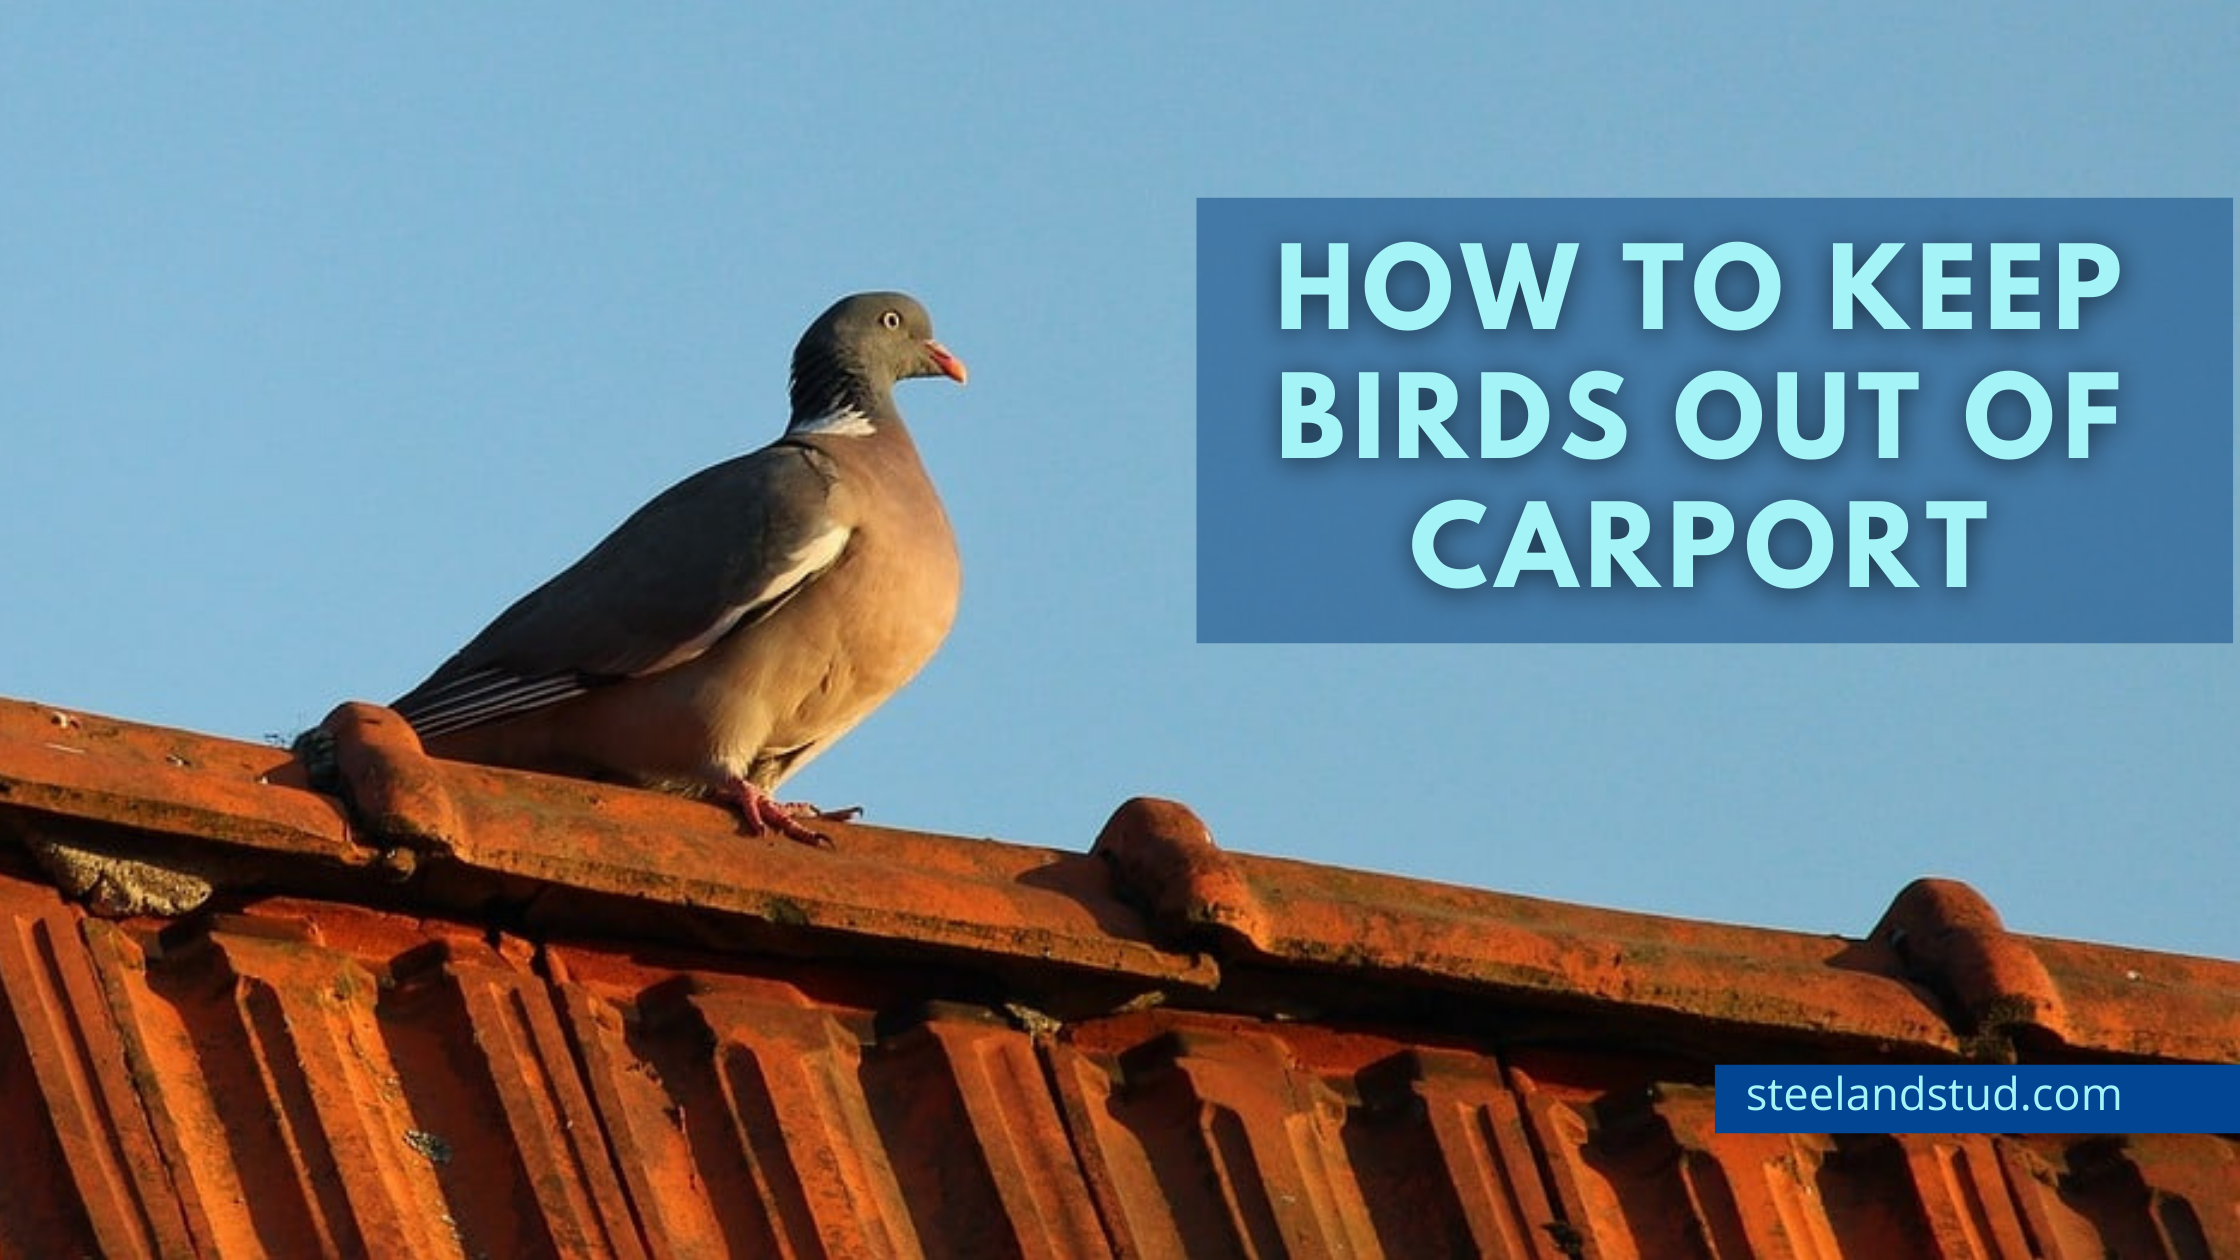 How to Keep Bird Out of Carport